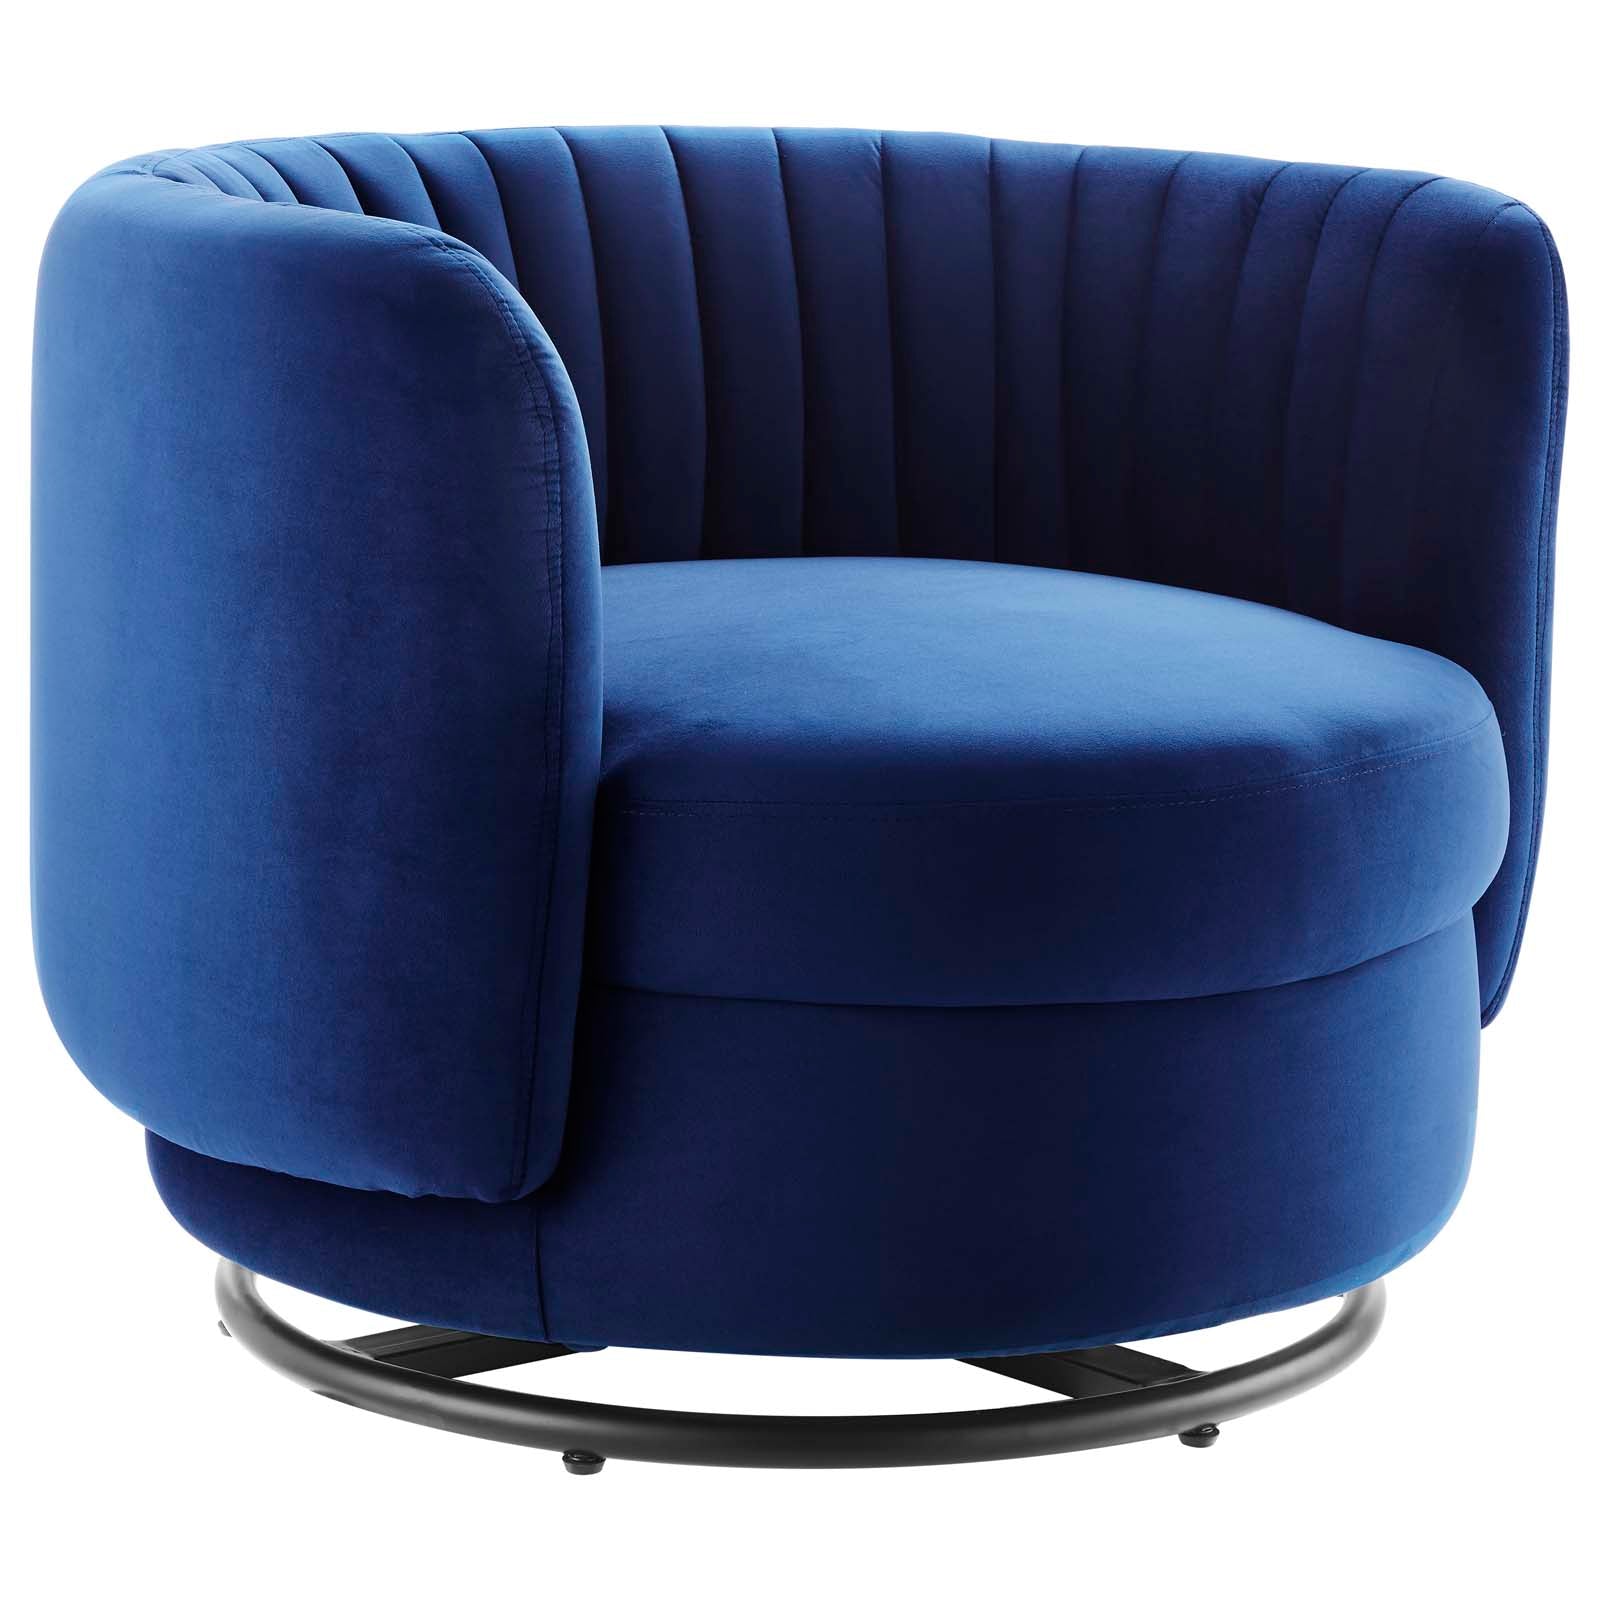 Modway Accent Chairs - Embrace Tufted Performance Velvet Performance Velvet Swivel Chair Black Navy